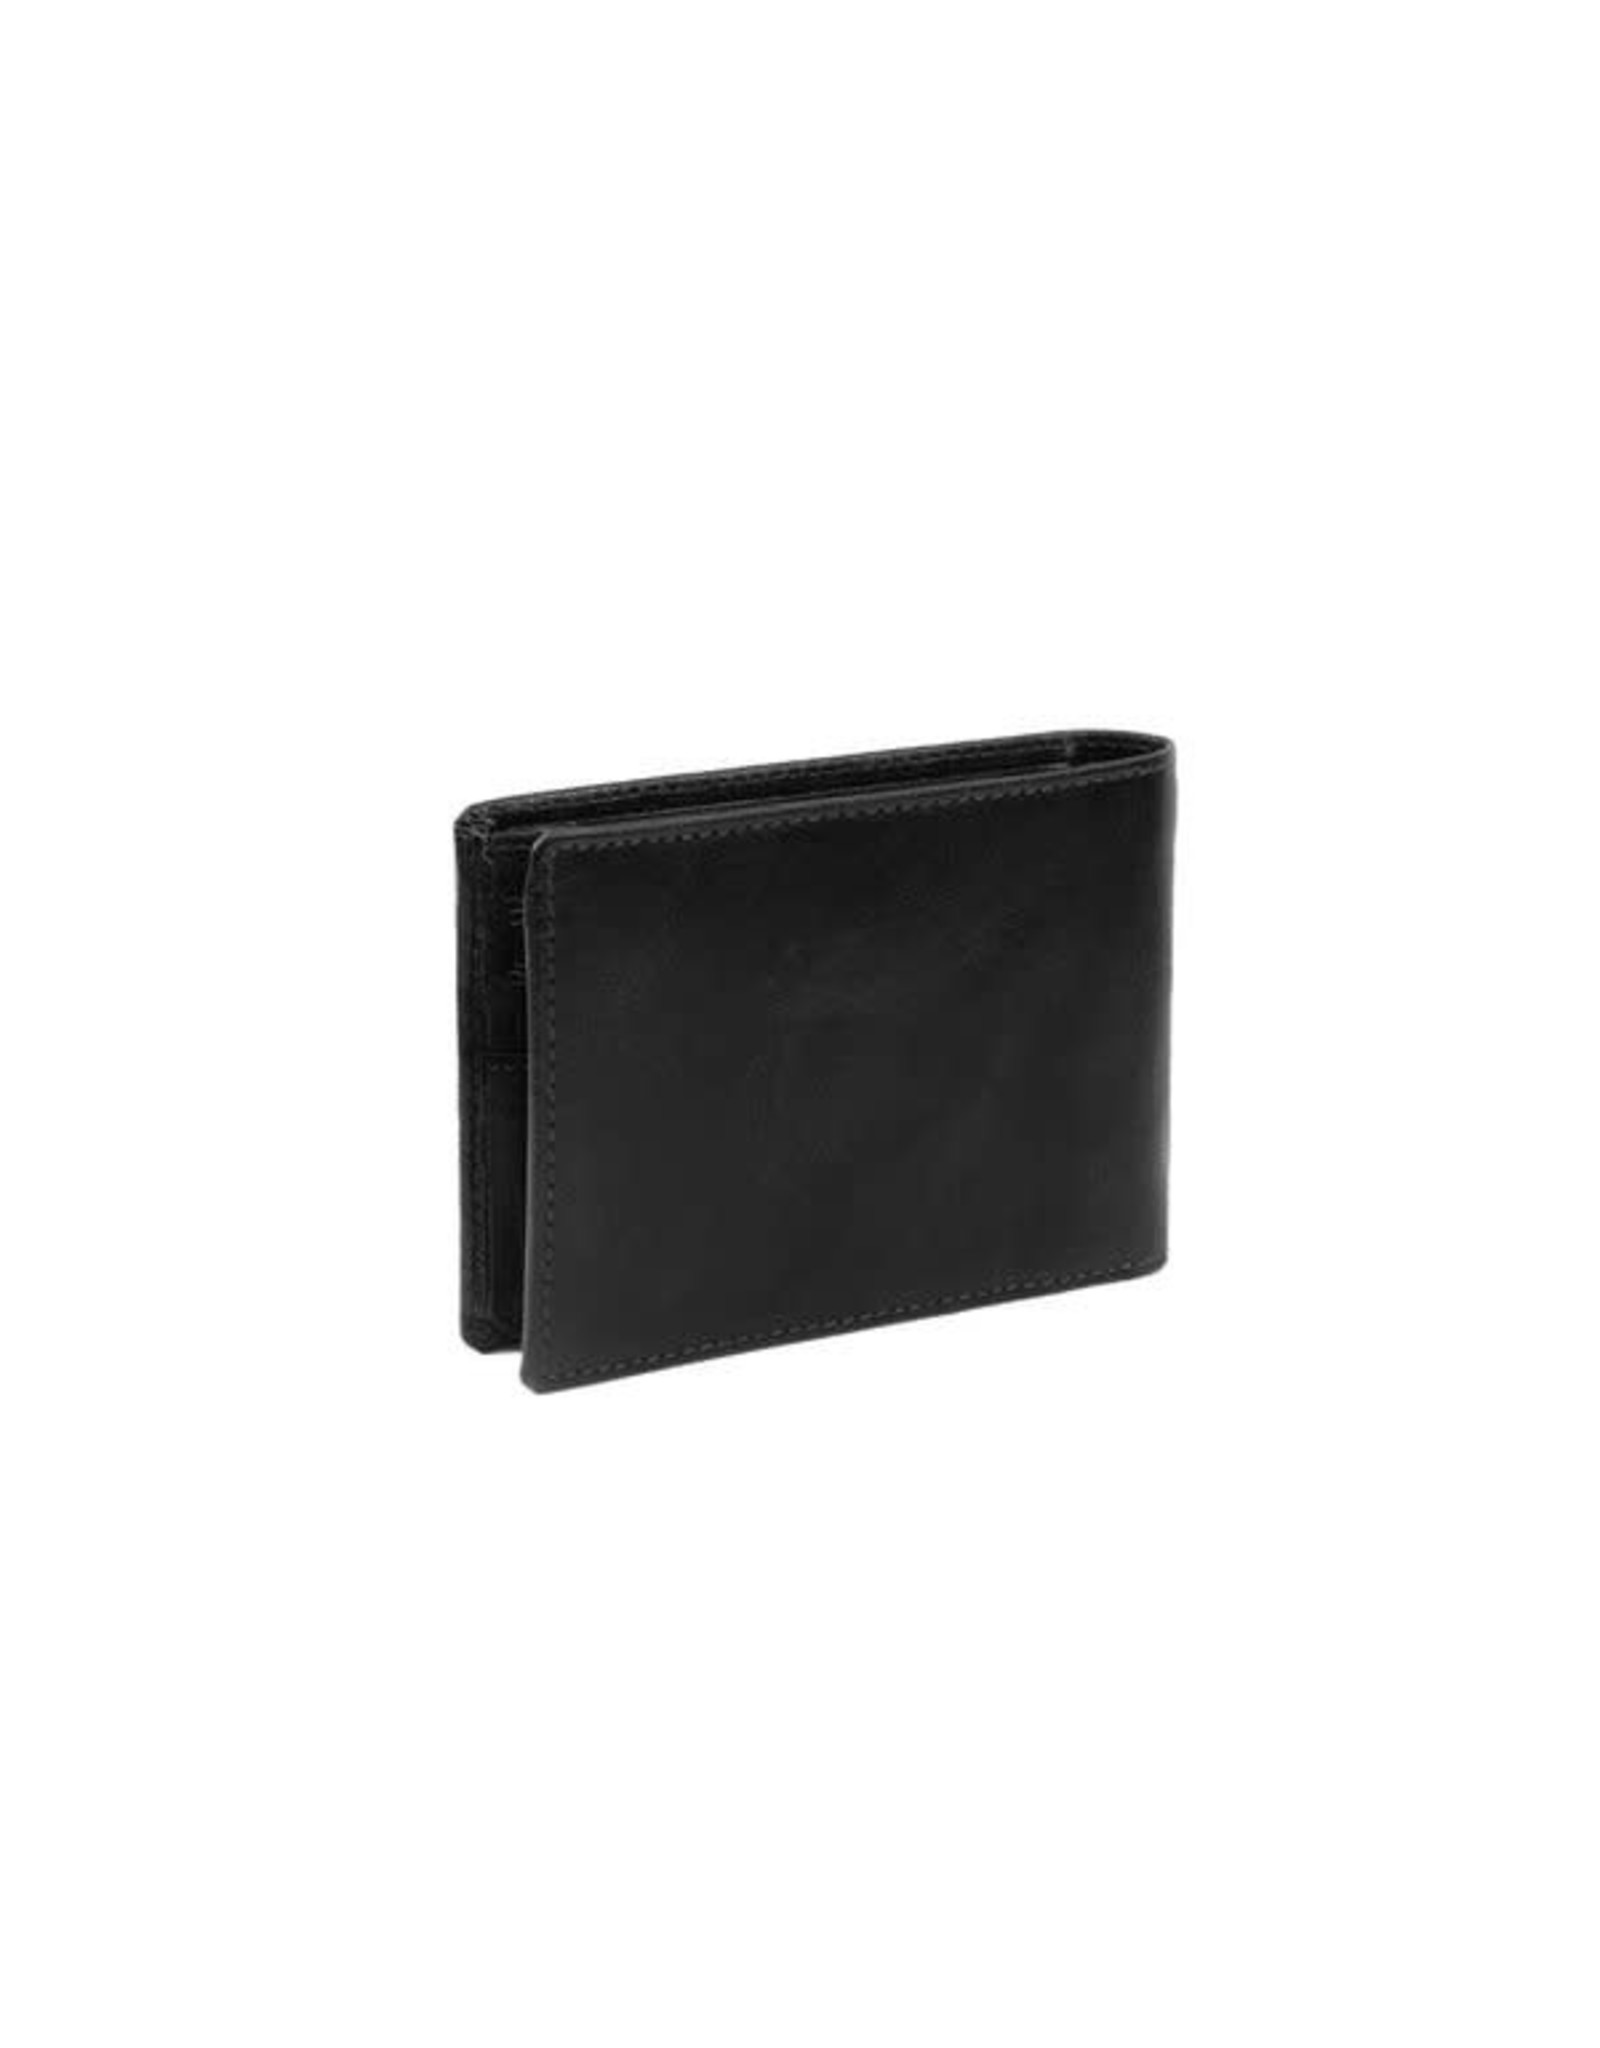 Chesterfield The Chesterfield Brand Wallet Harlem Antique Buff Black